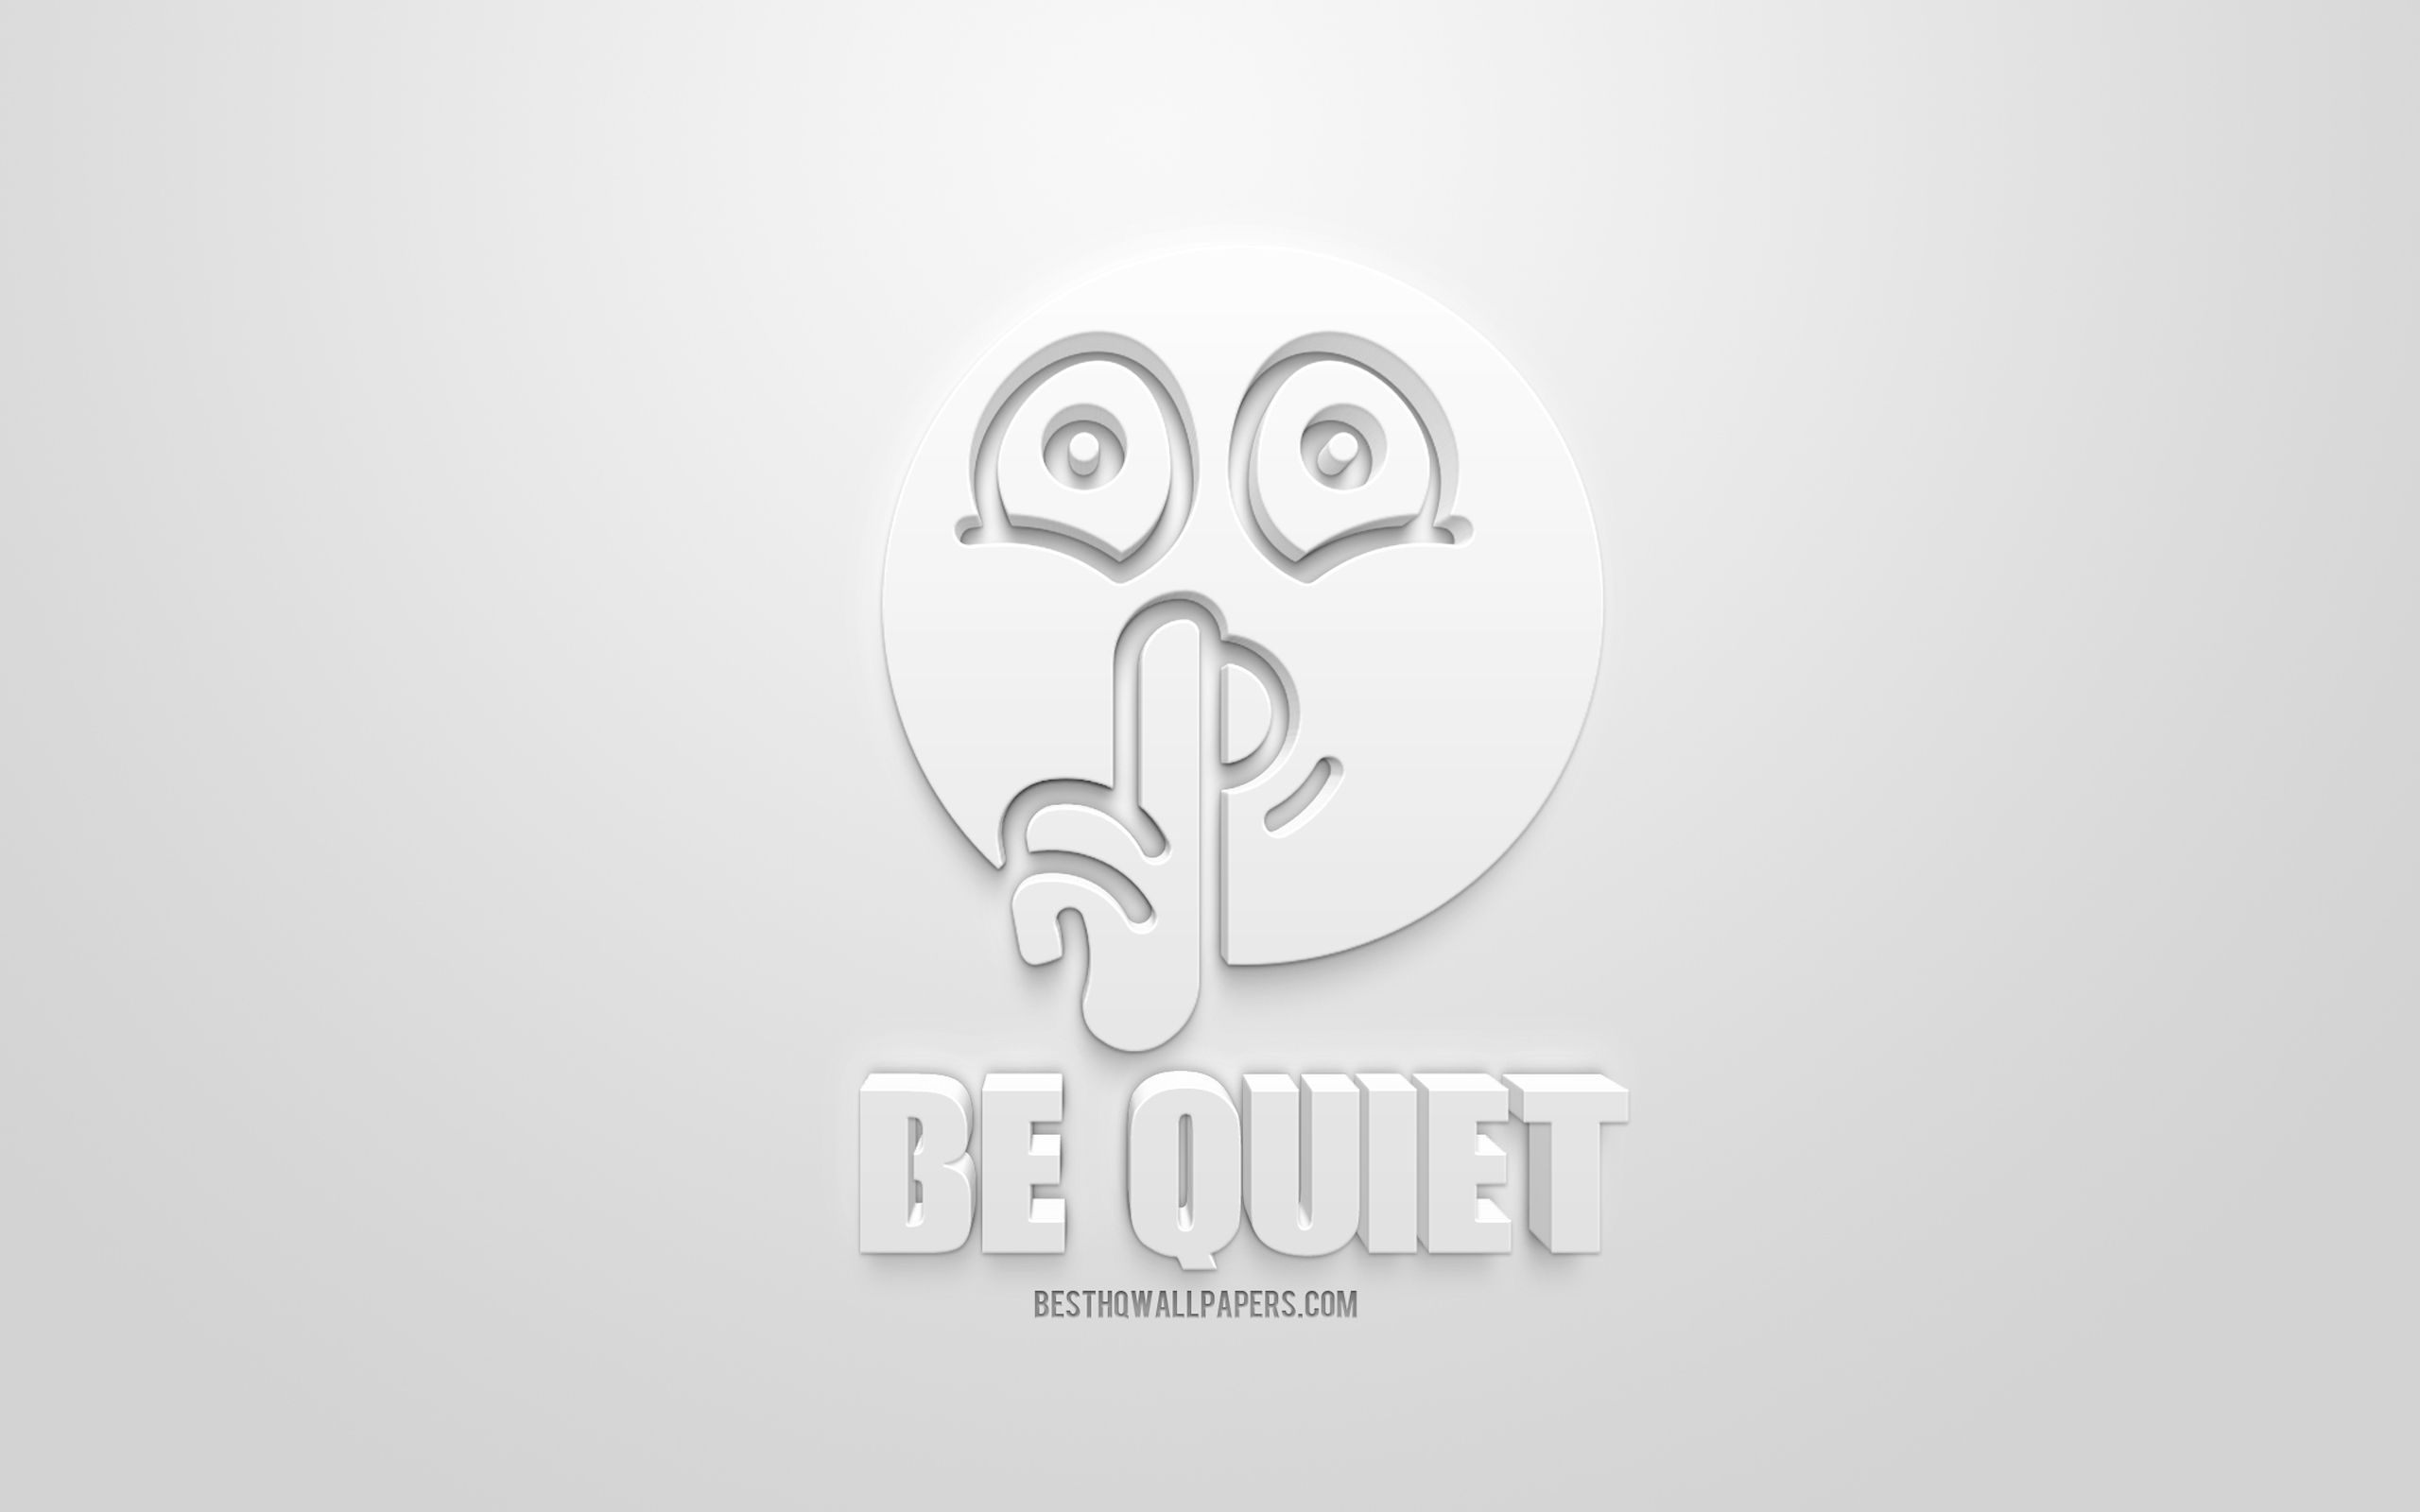 Download wallpaper Be quiet, white 3D icon, white background, creative 3D art, be quiet concepts, silence concepts, 3D characters for desktop with resolution 2560x1600. High Quality HD picture wallpaper